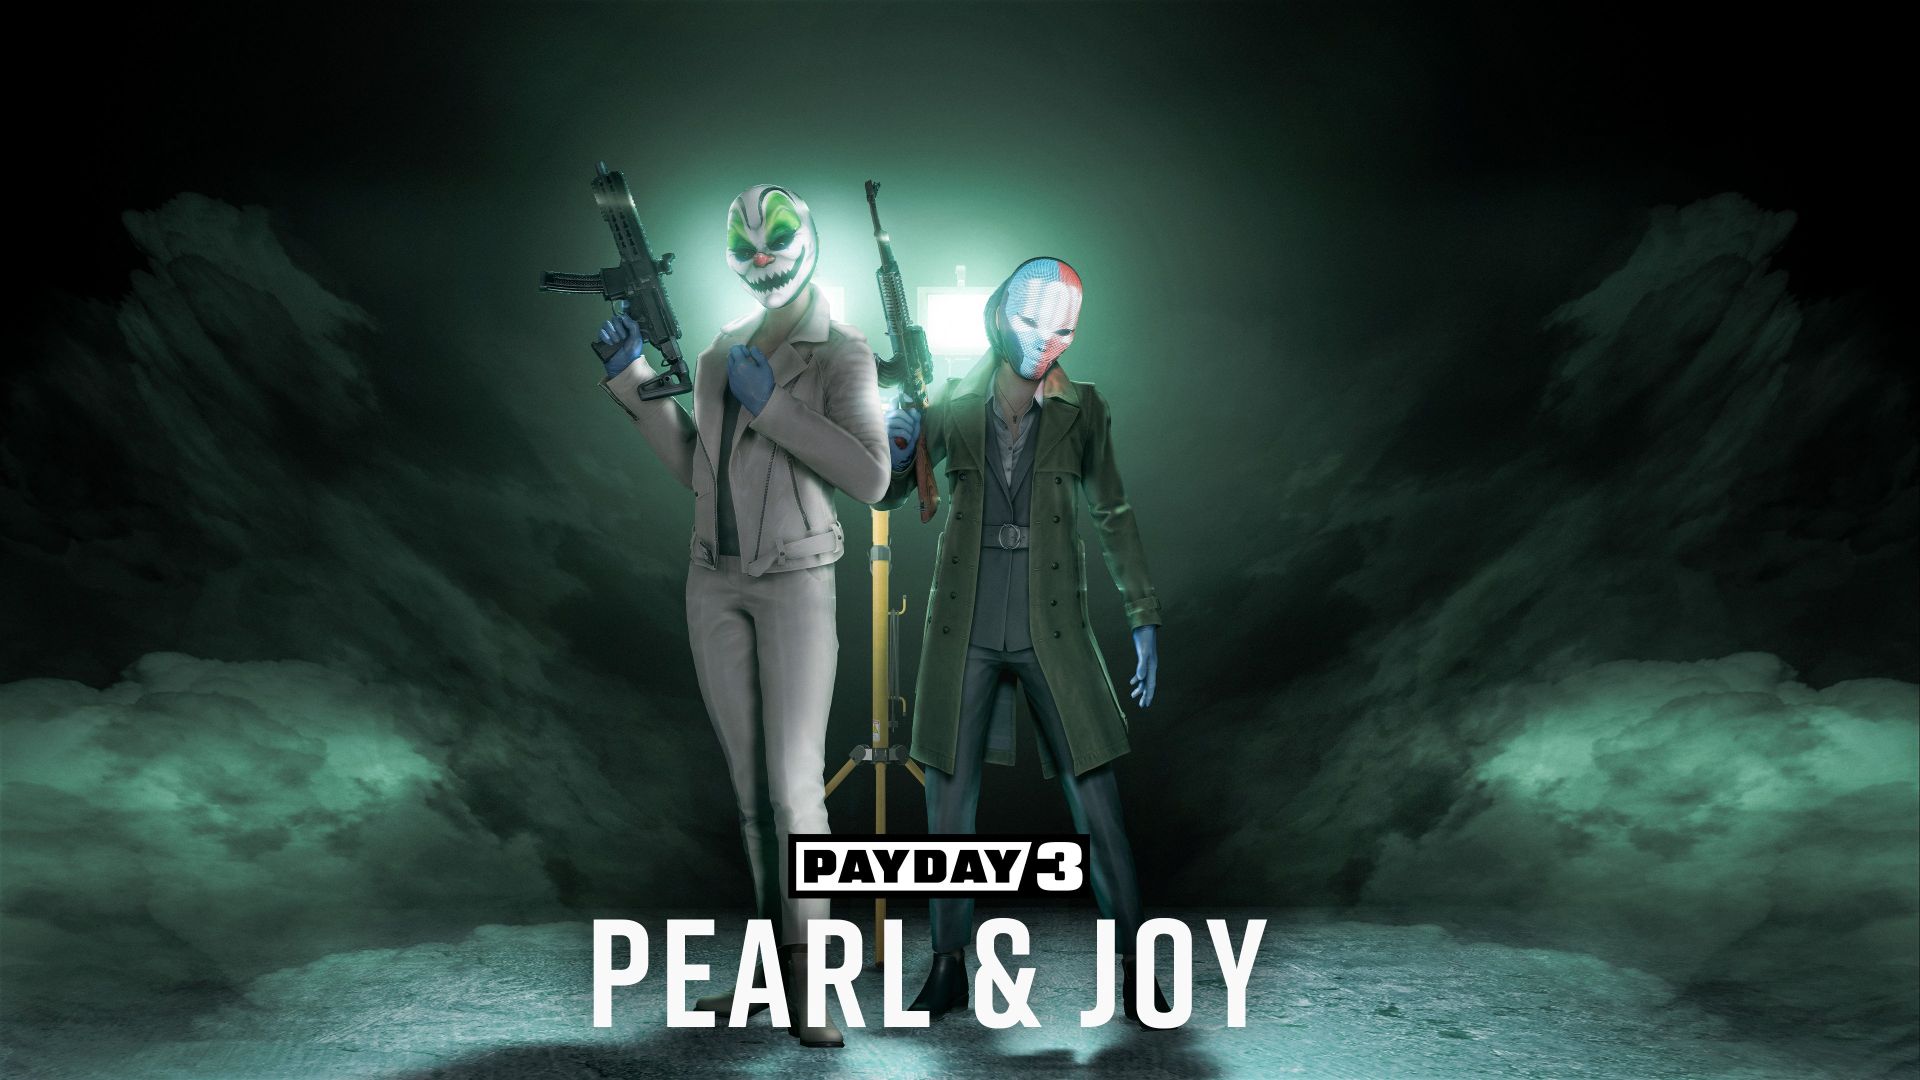 Payday 3 Trailer Showcases Heisters Pearl and Joy, Post-Launch Roadmap Revealed